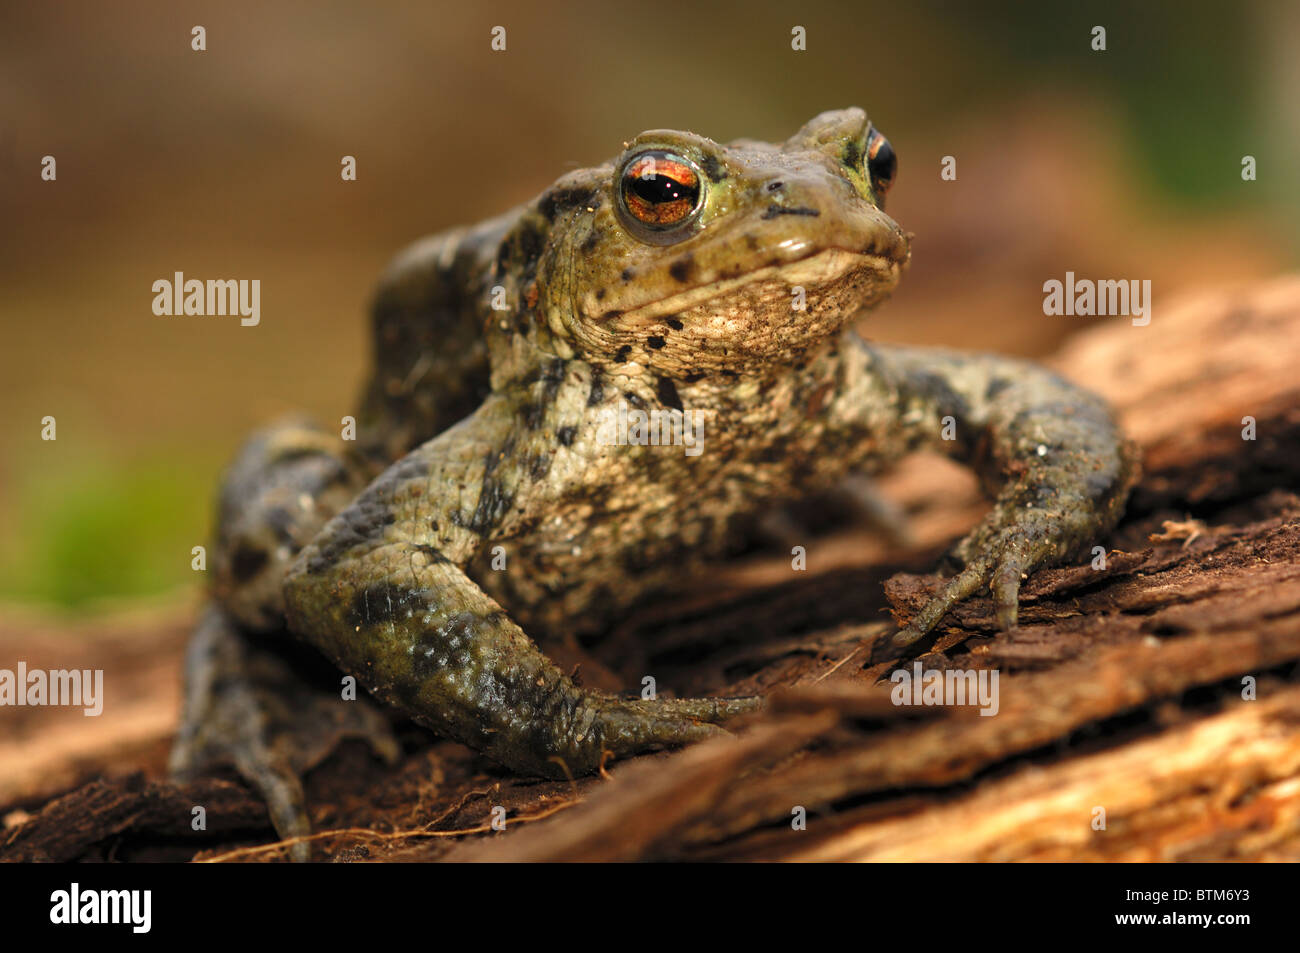 A male common toad in spring showing its front legs and face especially clearly . Dorset, UK March 2010 Stock Photo